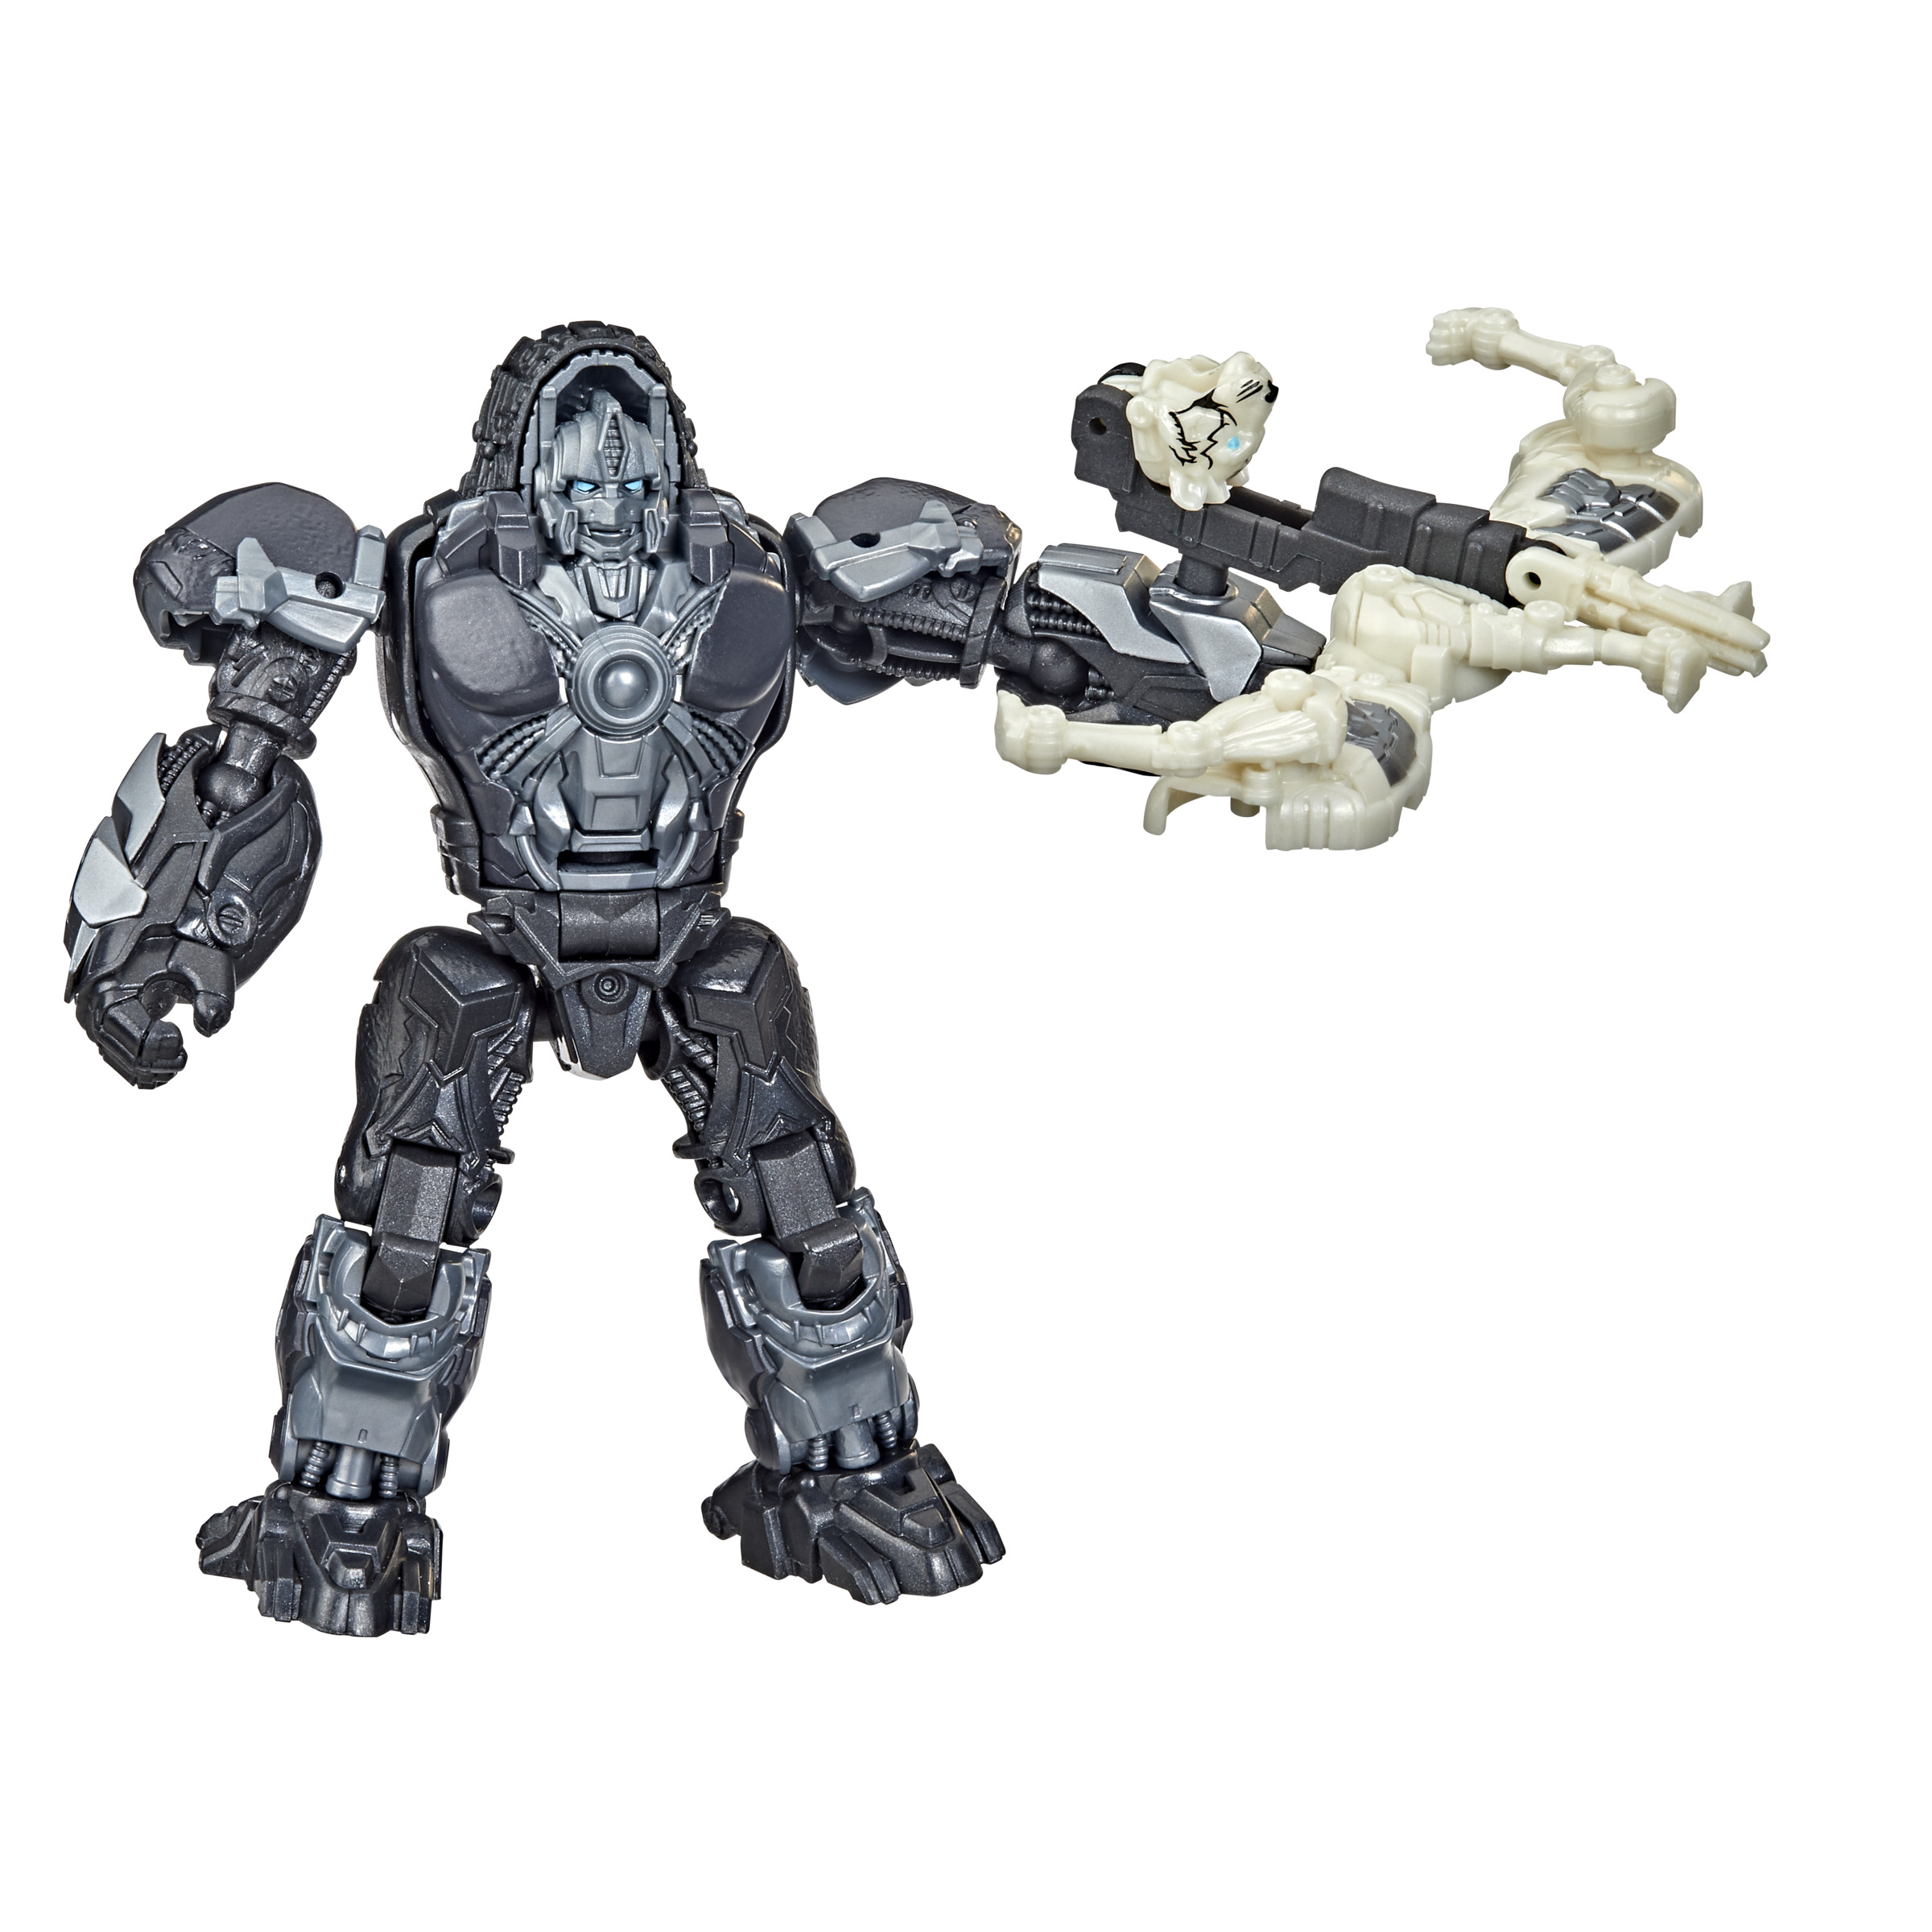 TRANSFORMERS Beast Weaponizers Actionfigur